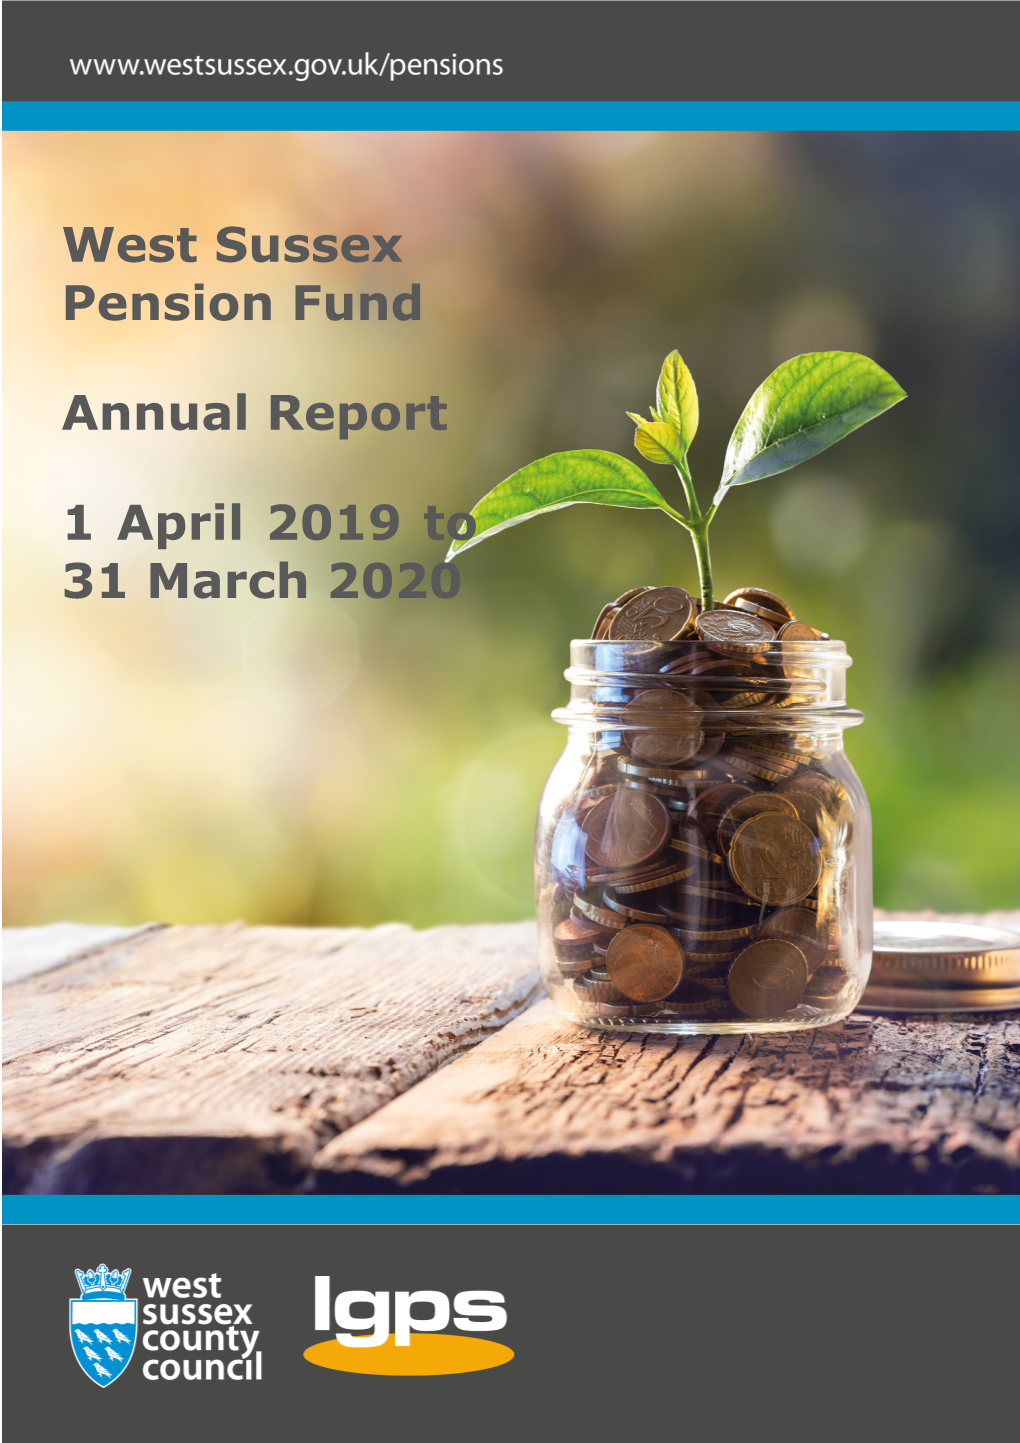 West Sussex Pension Fund Annual Report: 1 April 2019 to 31 March 2020